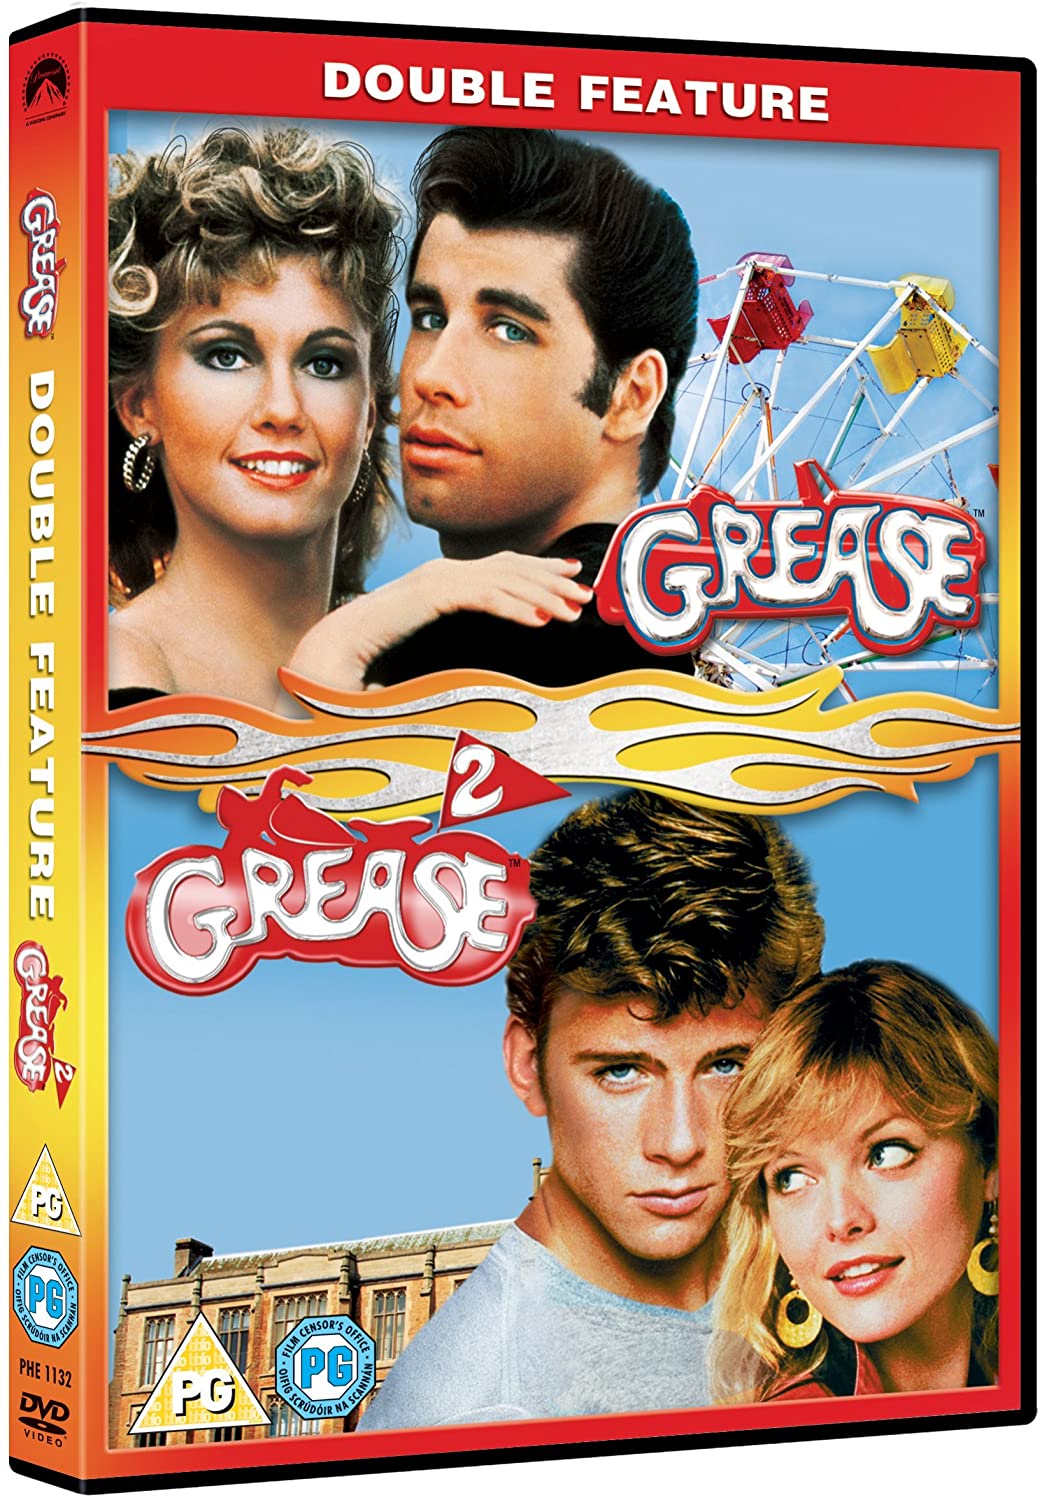 Grease/Grease 2 - Musical/Romance [DVD]